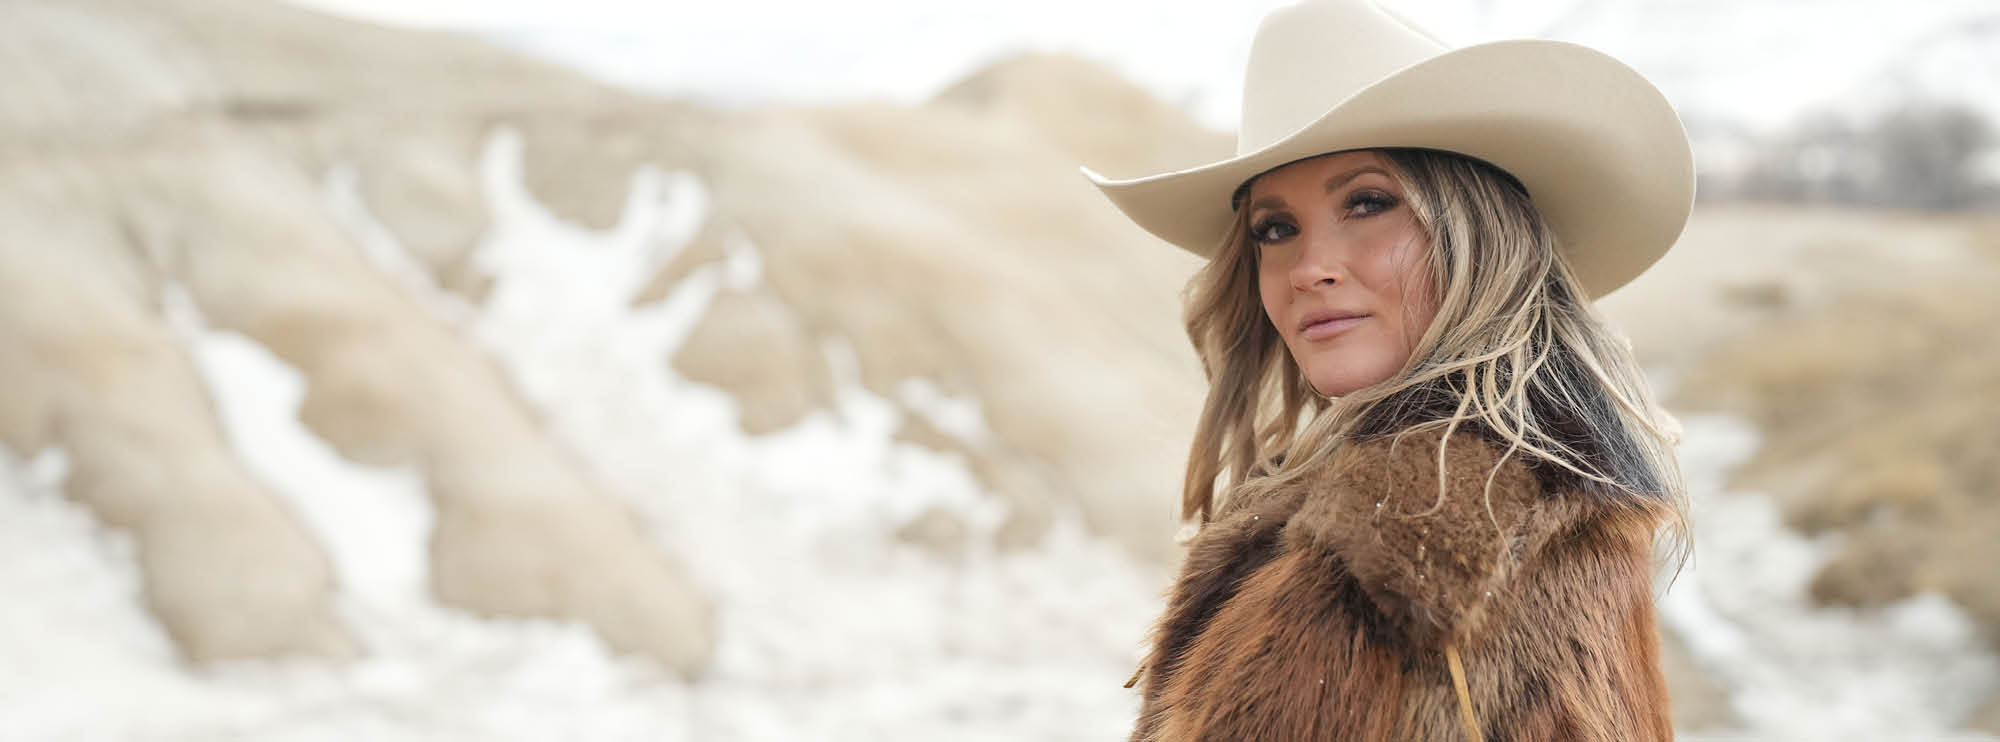 Woman in a cowboy hat and fur coat standing in a snowy, mountainous landscape, looking over her shoulder.